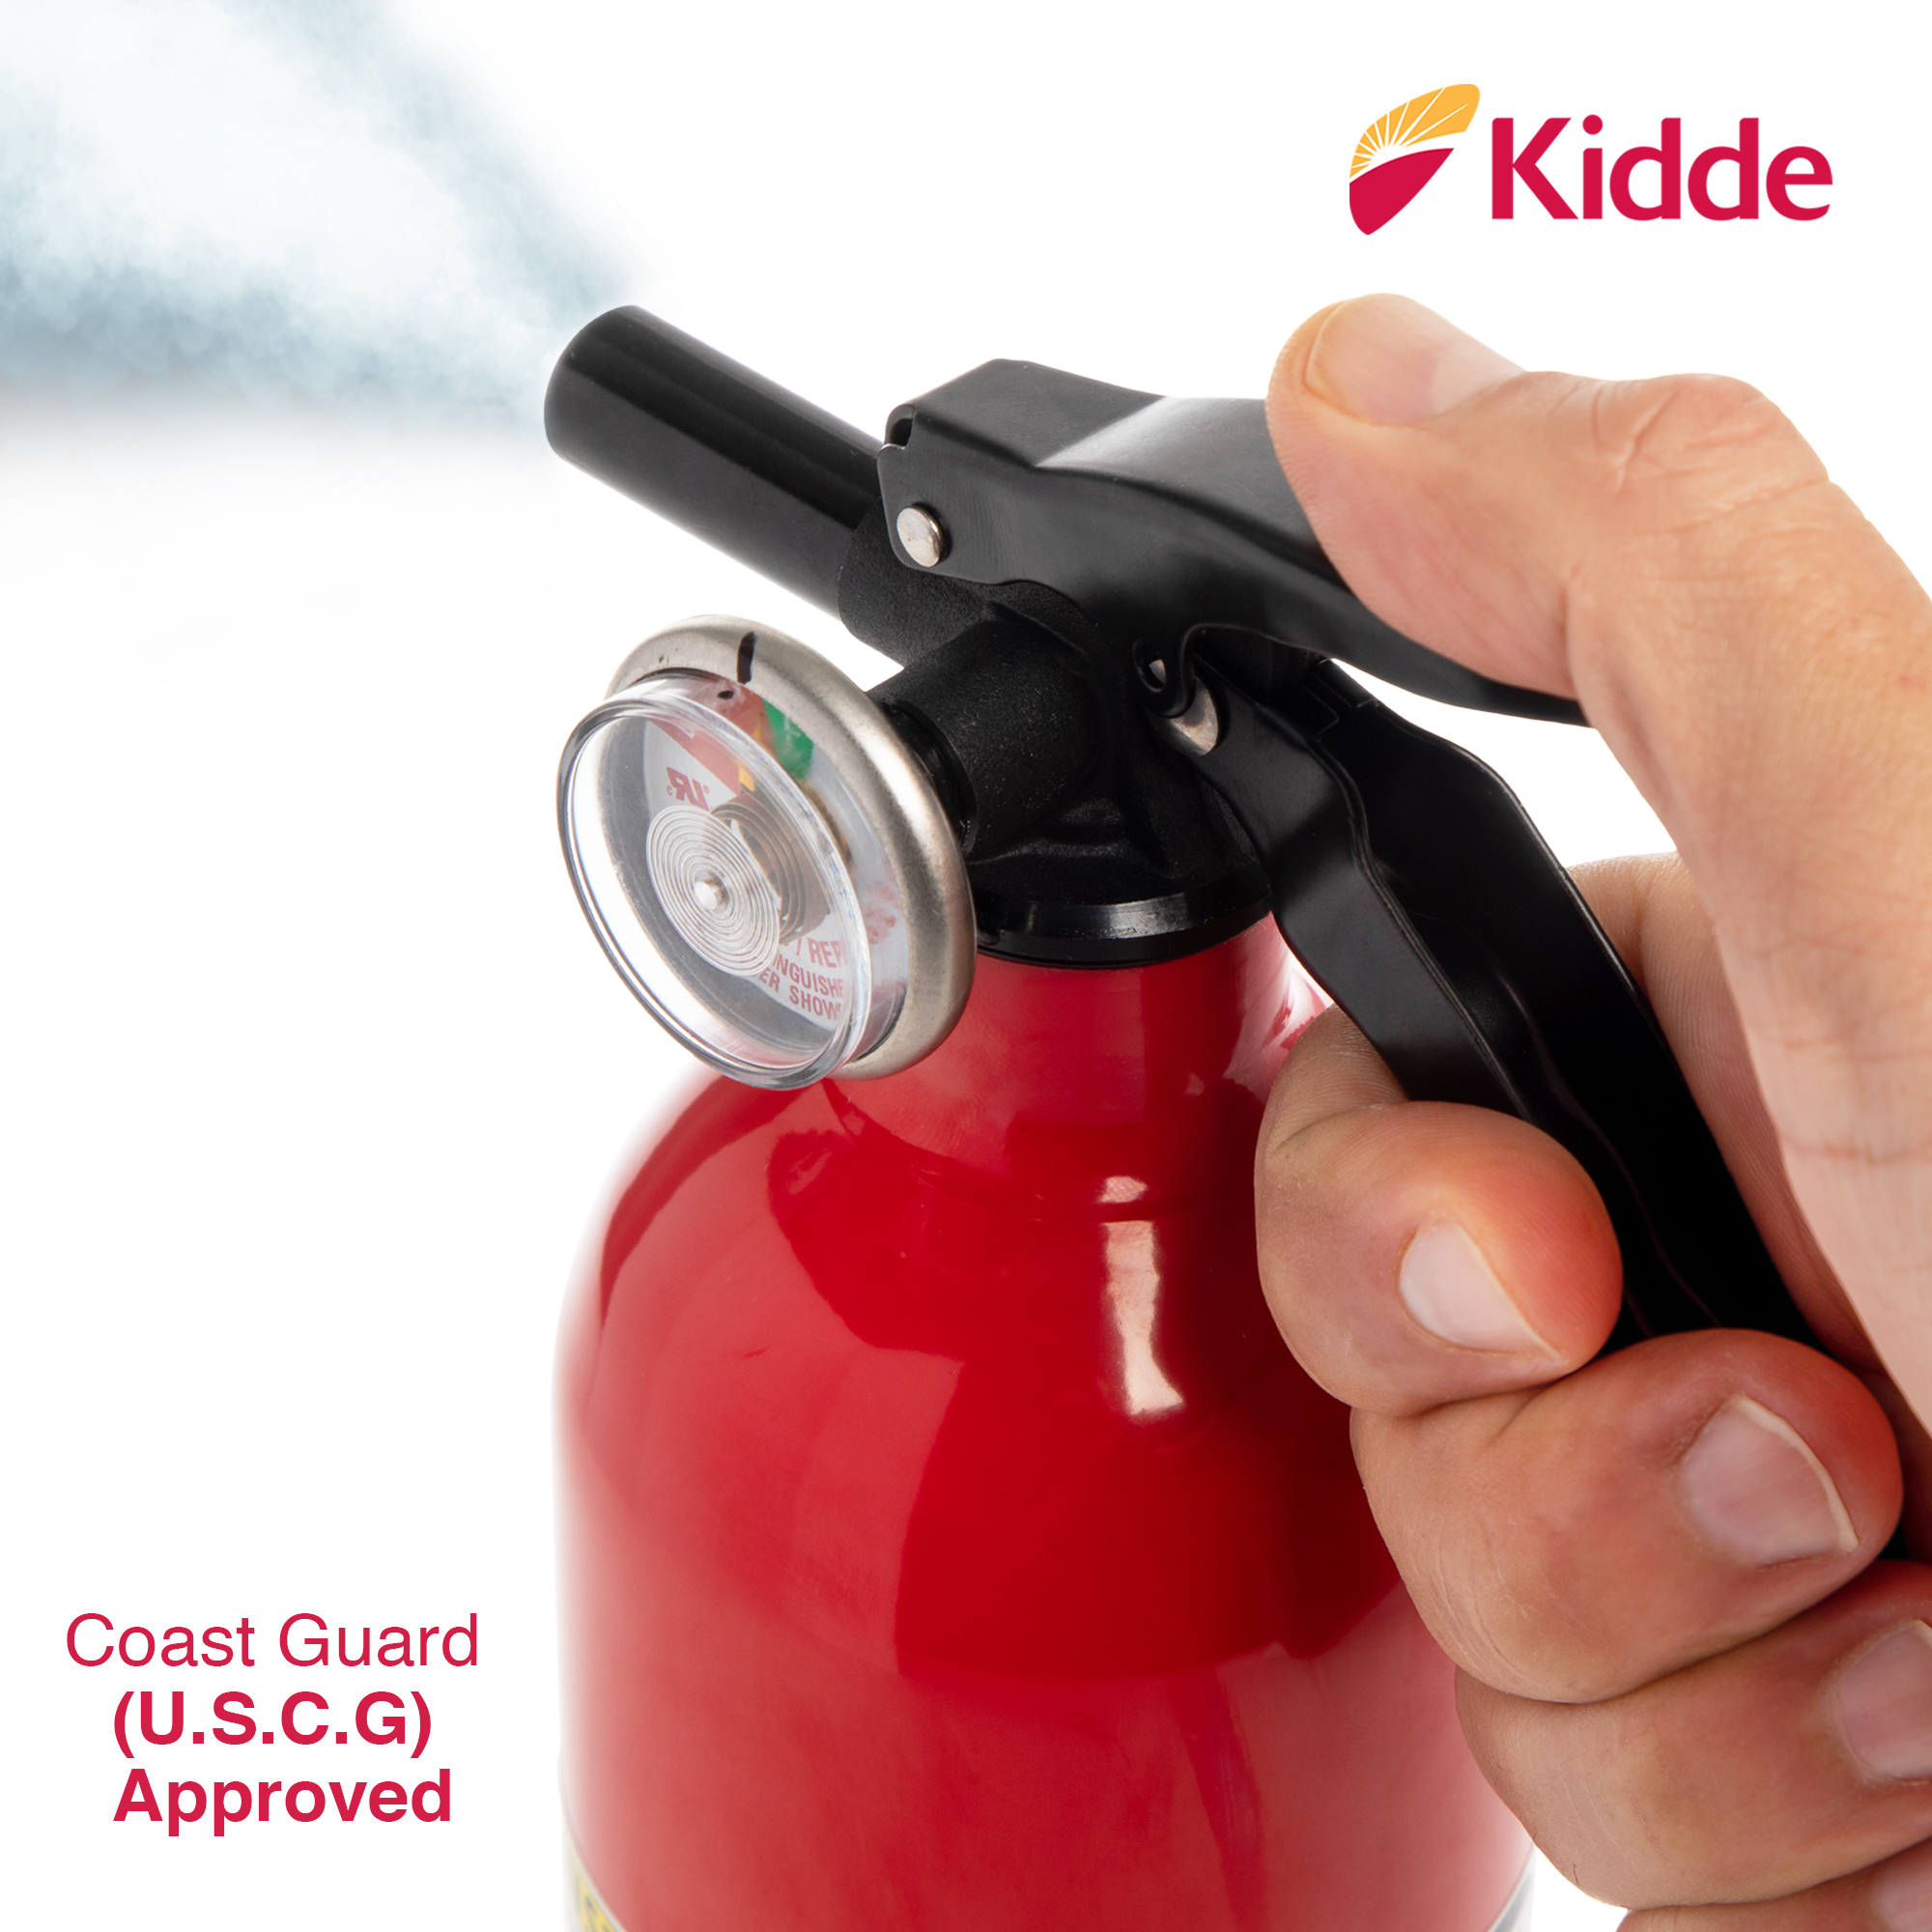 Kidde Multipurpose Home Fire Extinguisher, UL Rated 1-A:10-B:C, Model KD82-110ABC - image 5 of 8